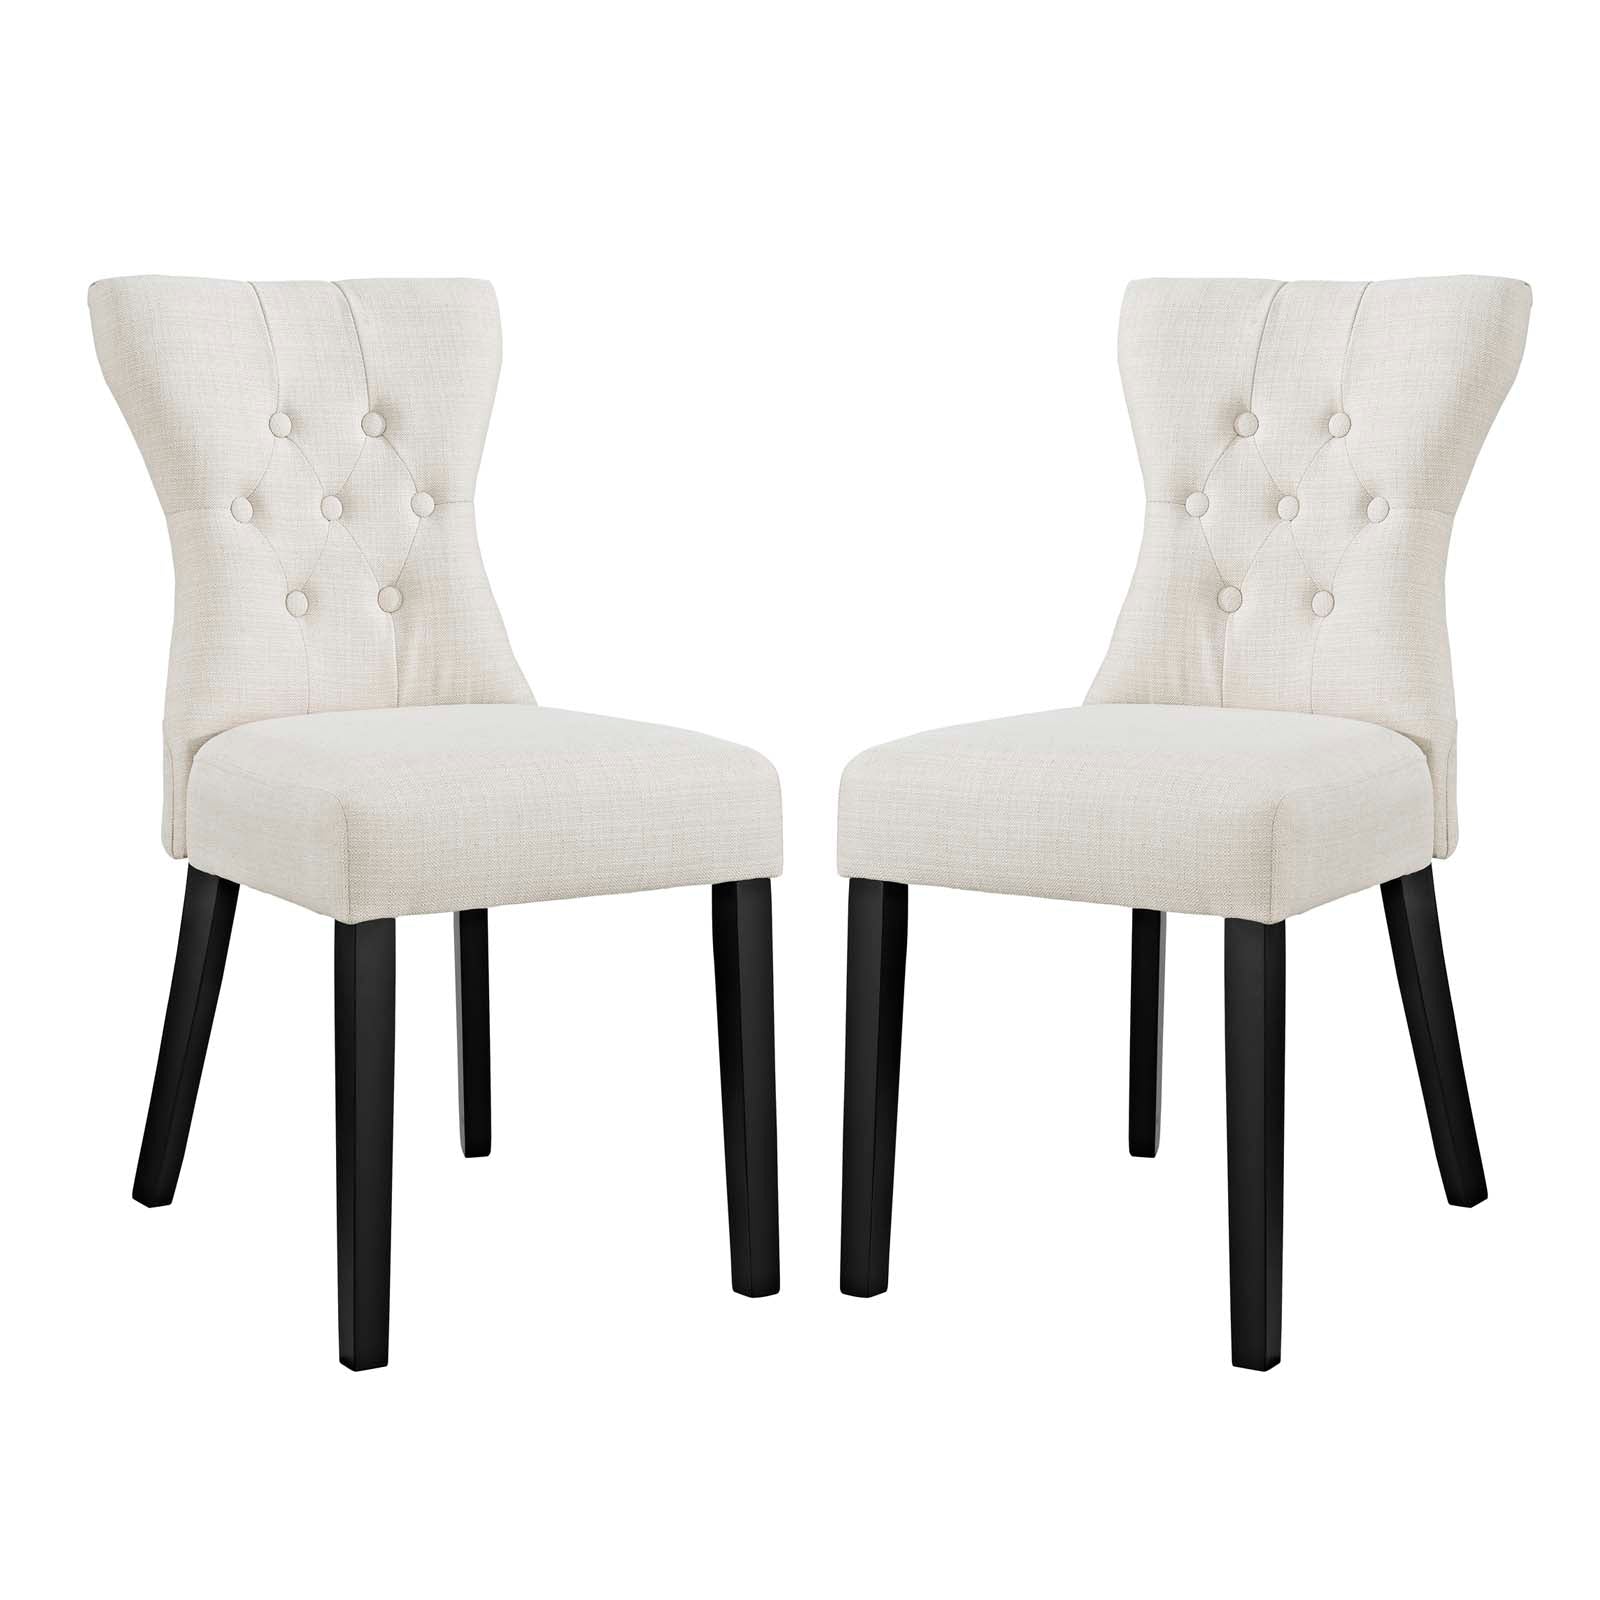 Modway Dining Chairs - Silhouette Dining Side Chairs Upholstered Fabric Beige ( Set of 2 )